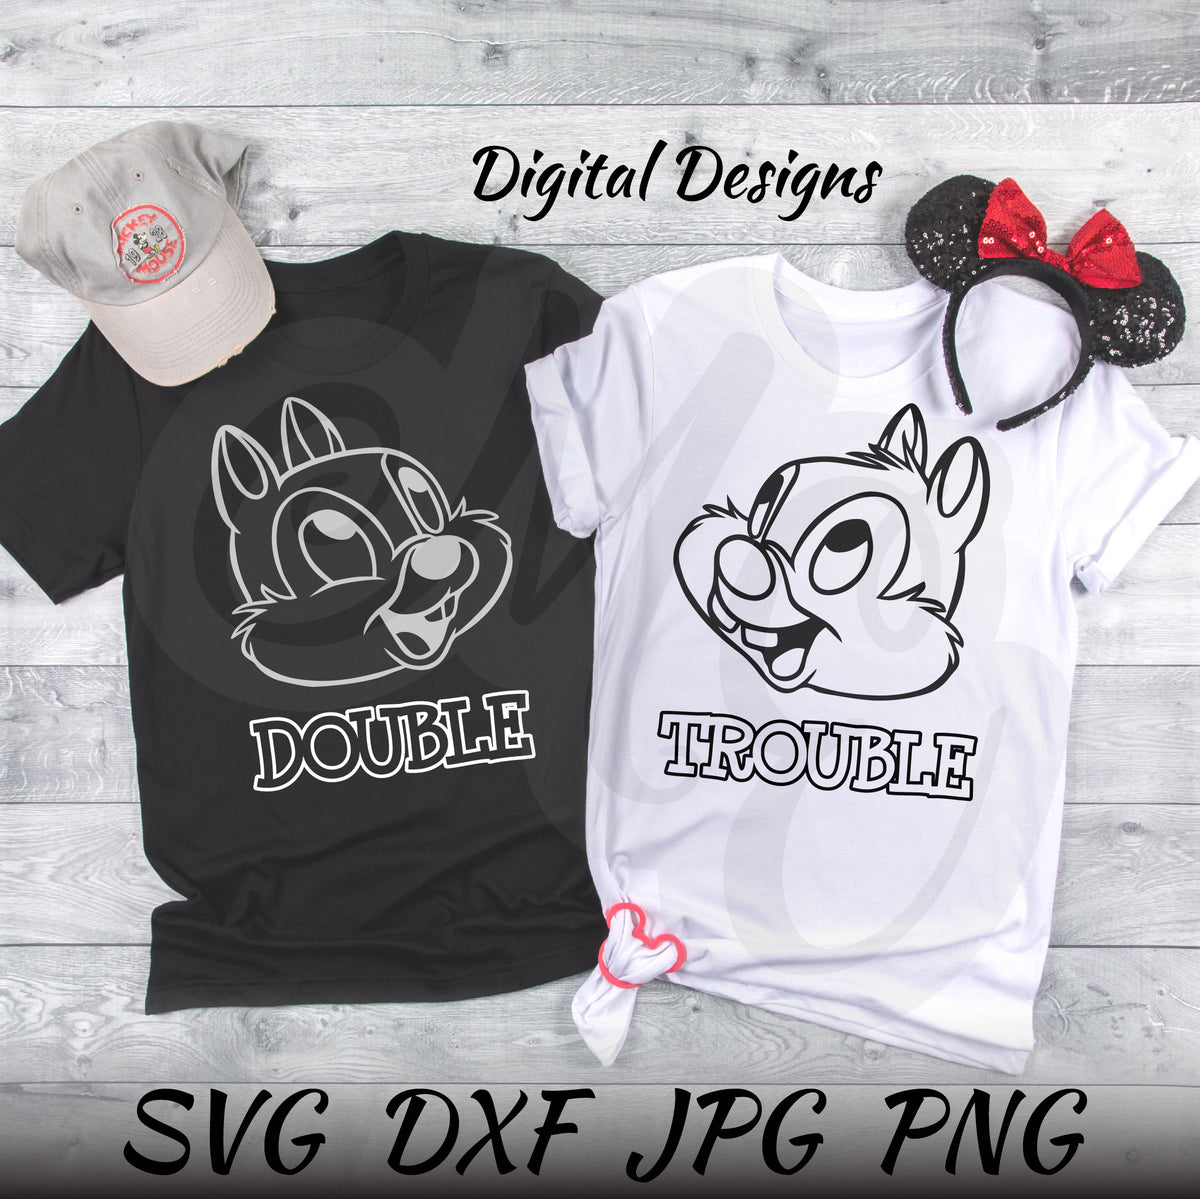 Double trouble PNG Designs for T Shirt & Merch